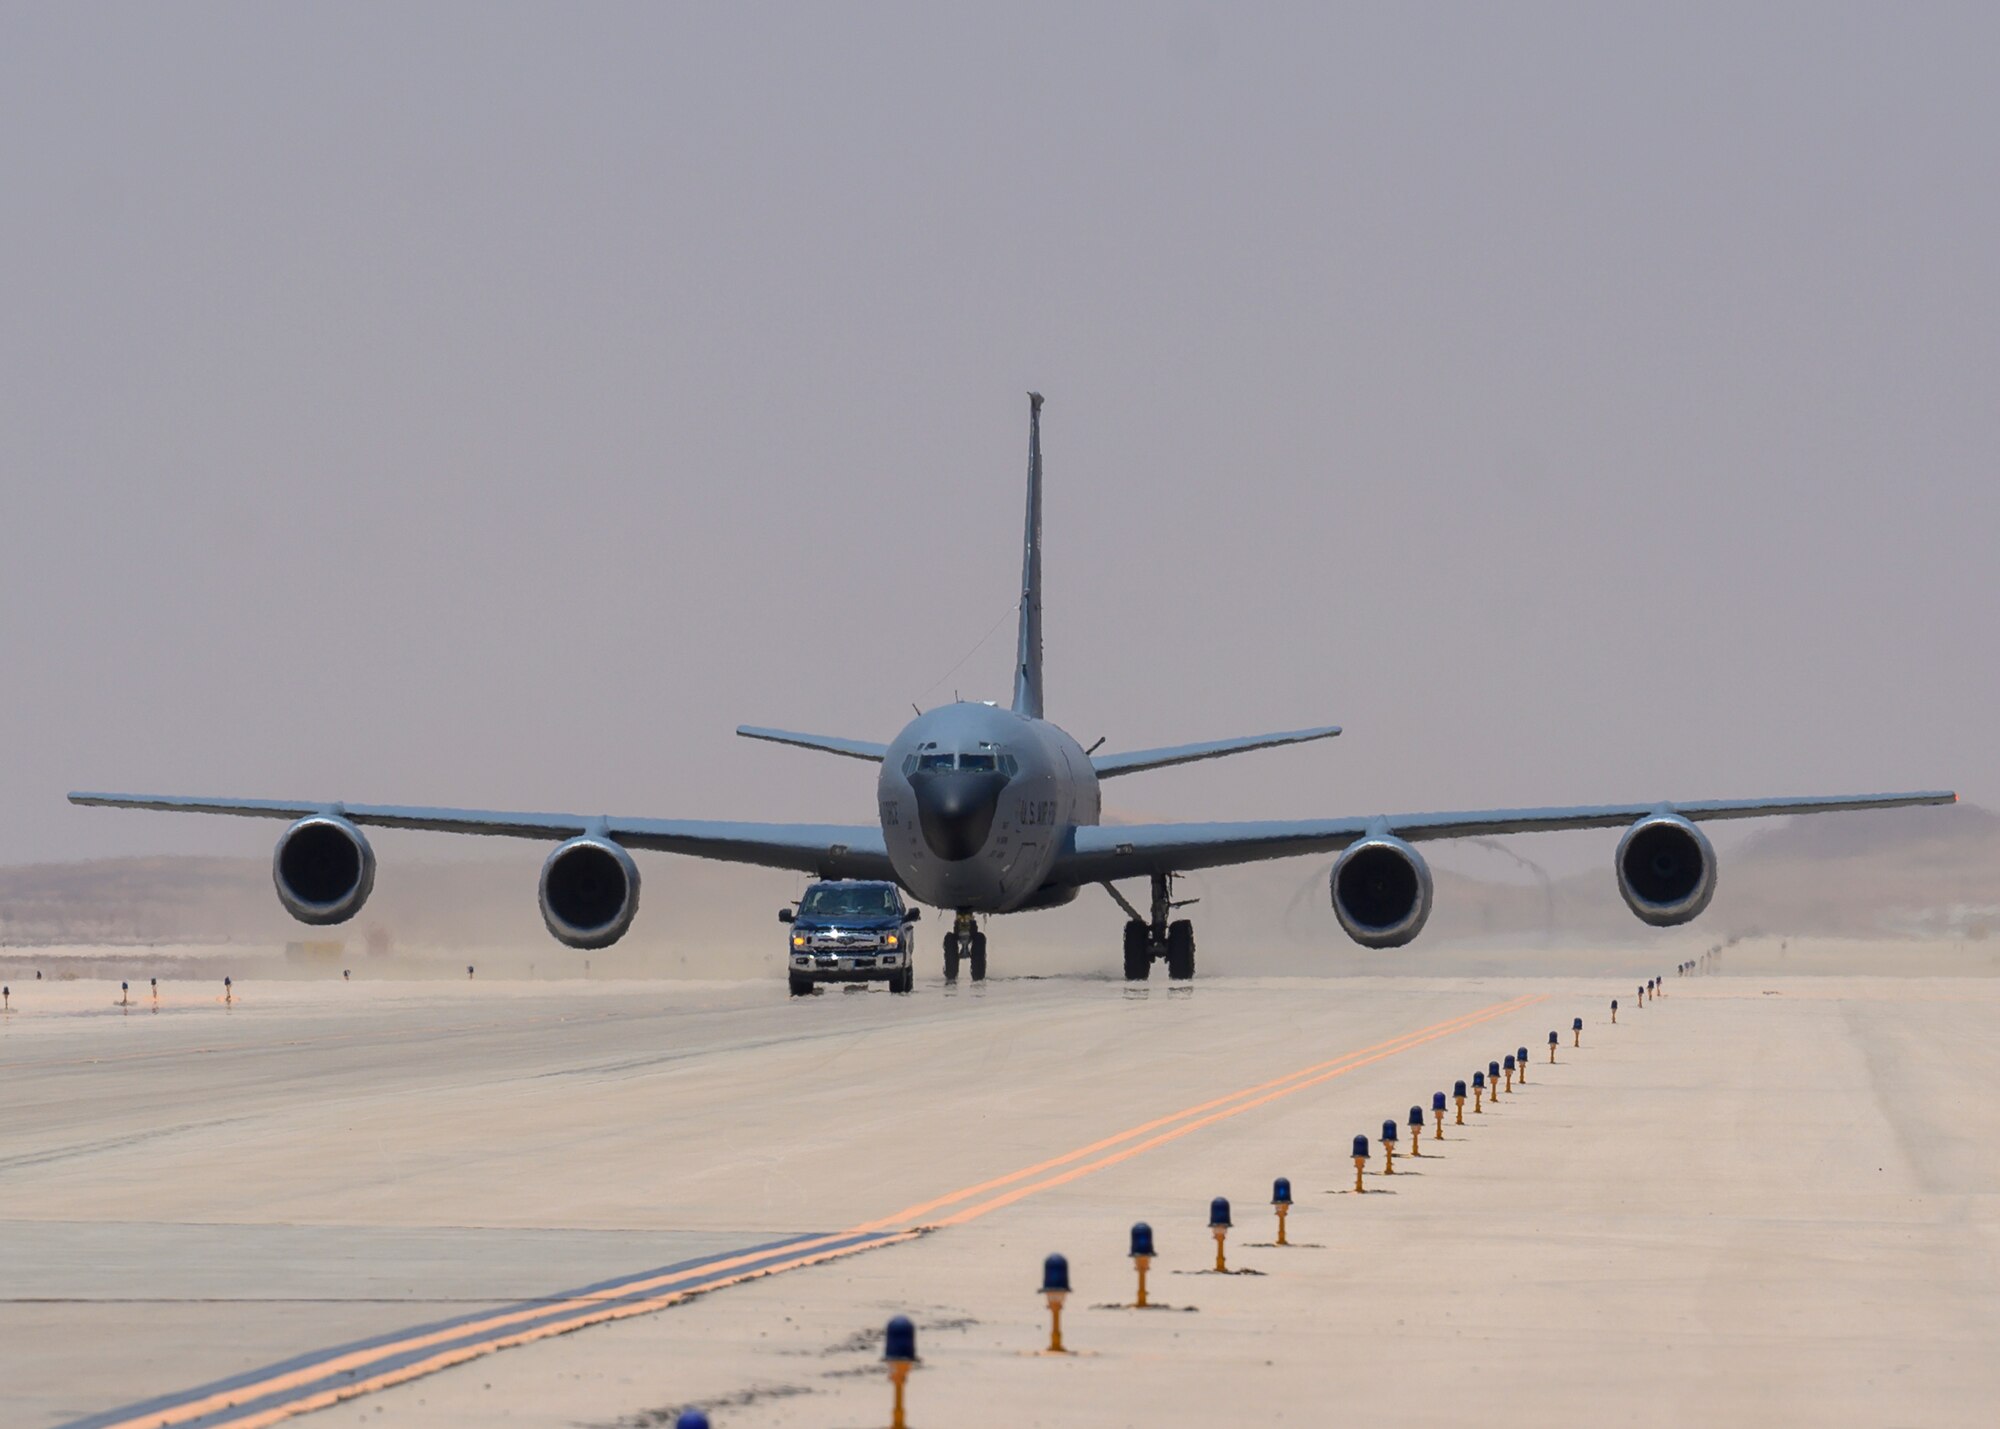 A U.S. Air Force KC-135 Stratotanker taxis to position for a hot-pit refueling, Prince Sultan Air Base, June 25, 2021. This event demonstrated the success of several weeks of hot-pit refueling cross-airframe training between 378th and 379th Air Expeditionary Wing maintainers, expanding both Wings ability to provide agile support for theater operations. (U.S. Air Force photo by Senior Airman Samuel Earick)